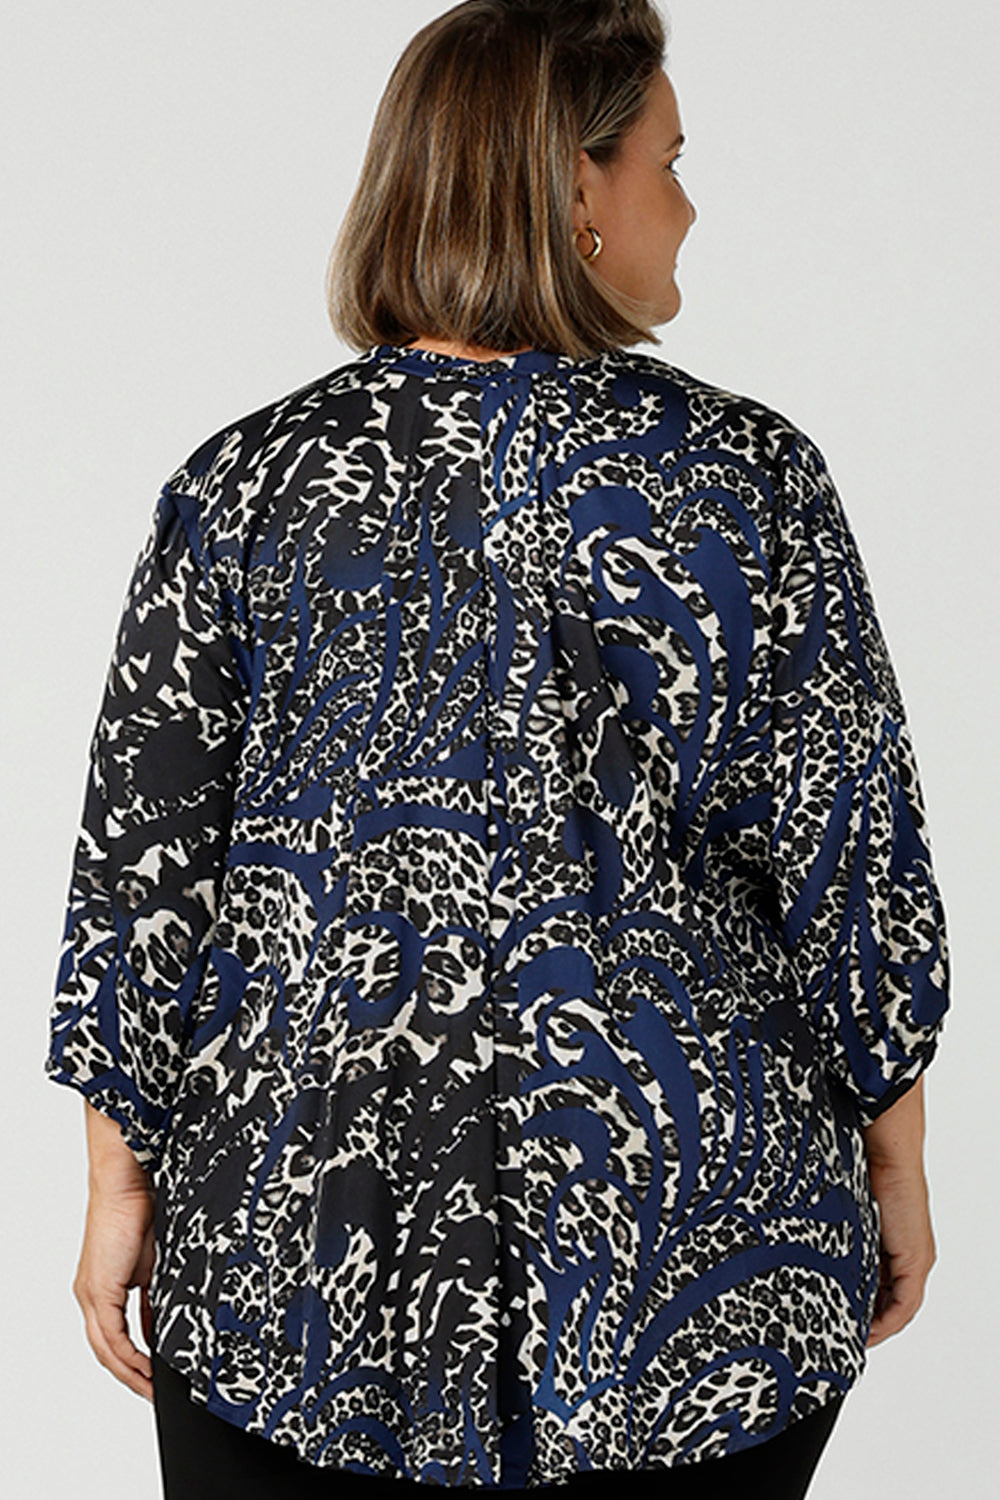 Back view of A curvy size 16  woman wearing an animal print woven top with a high-low hem. This lightweight top is comfortable for your everyday workwear, casual and travel capsule wardrobe. Shop this Australian-made shirt online in sizes 8 to 24, petite to plus sizes.